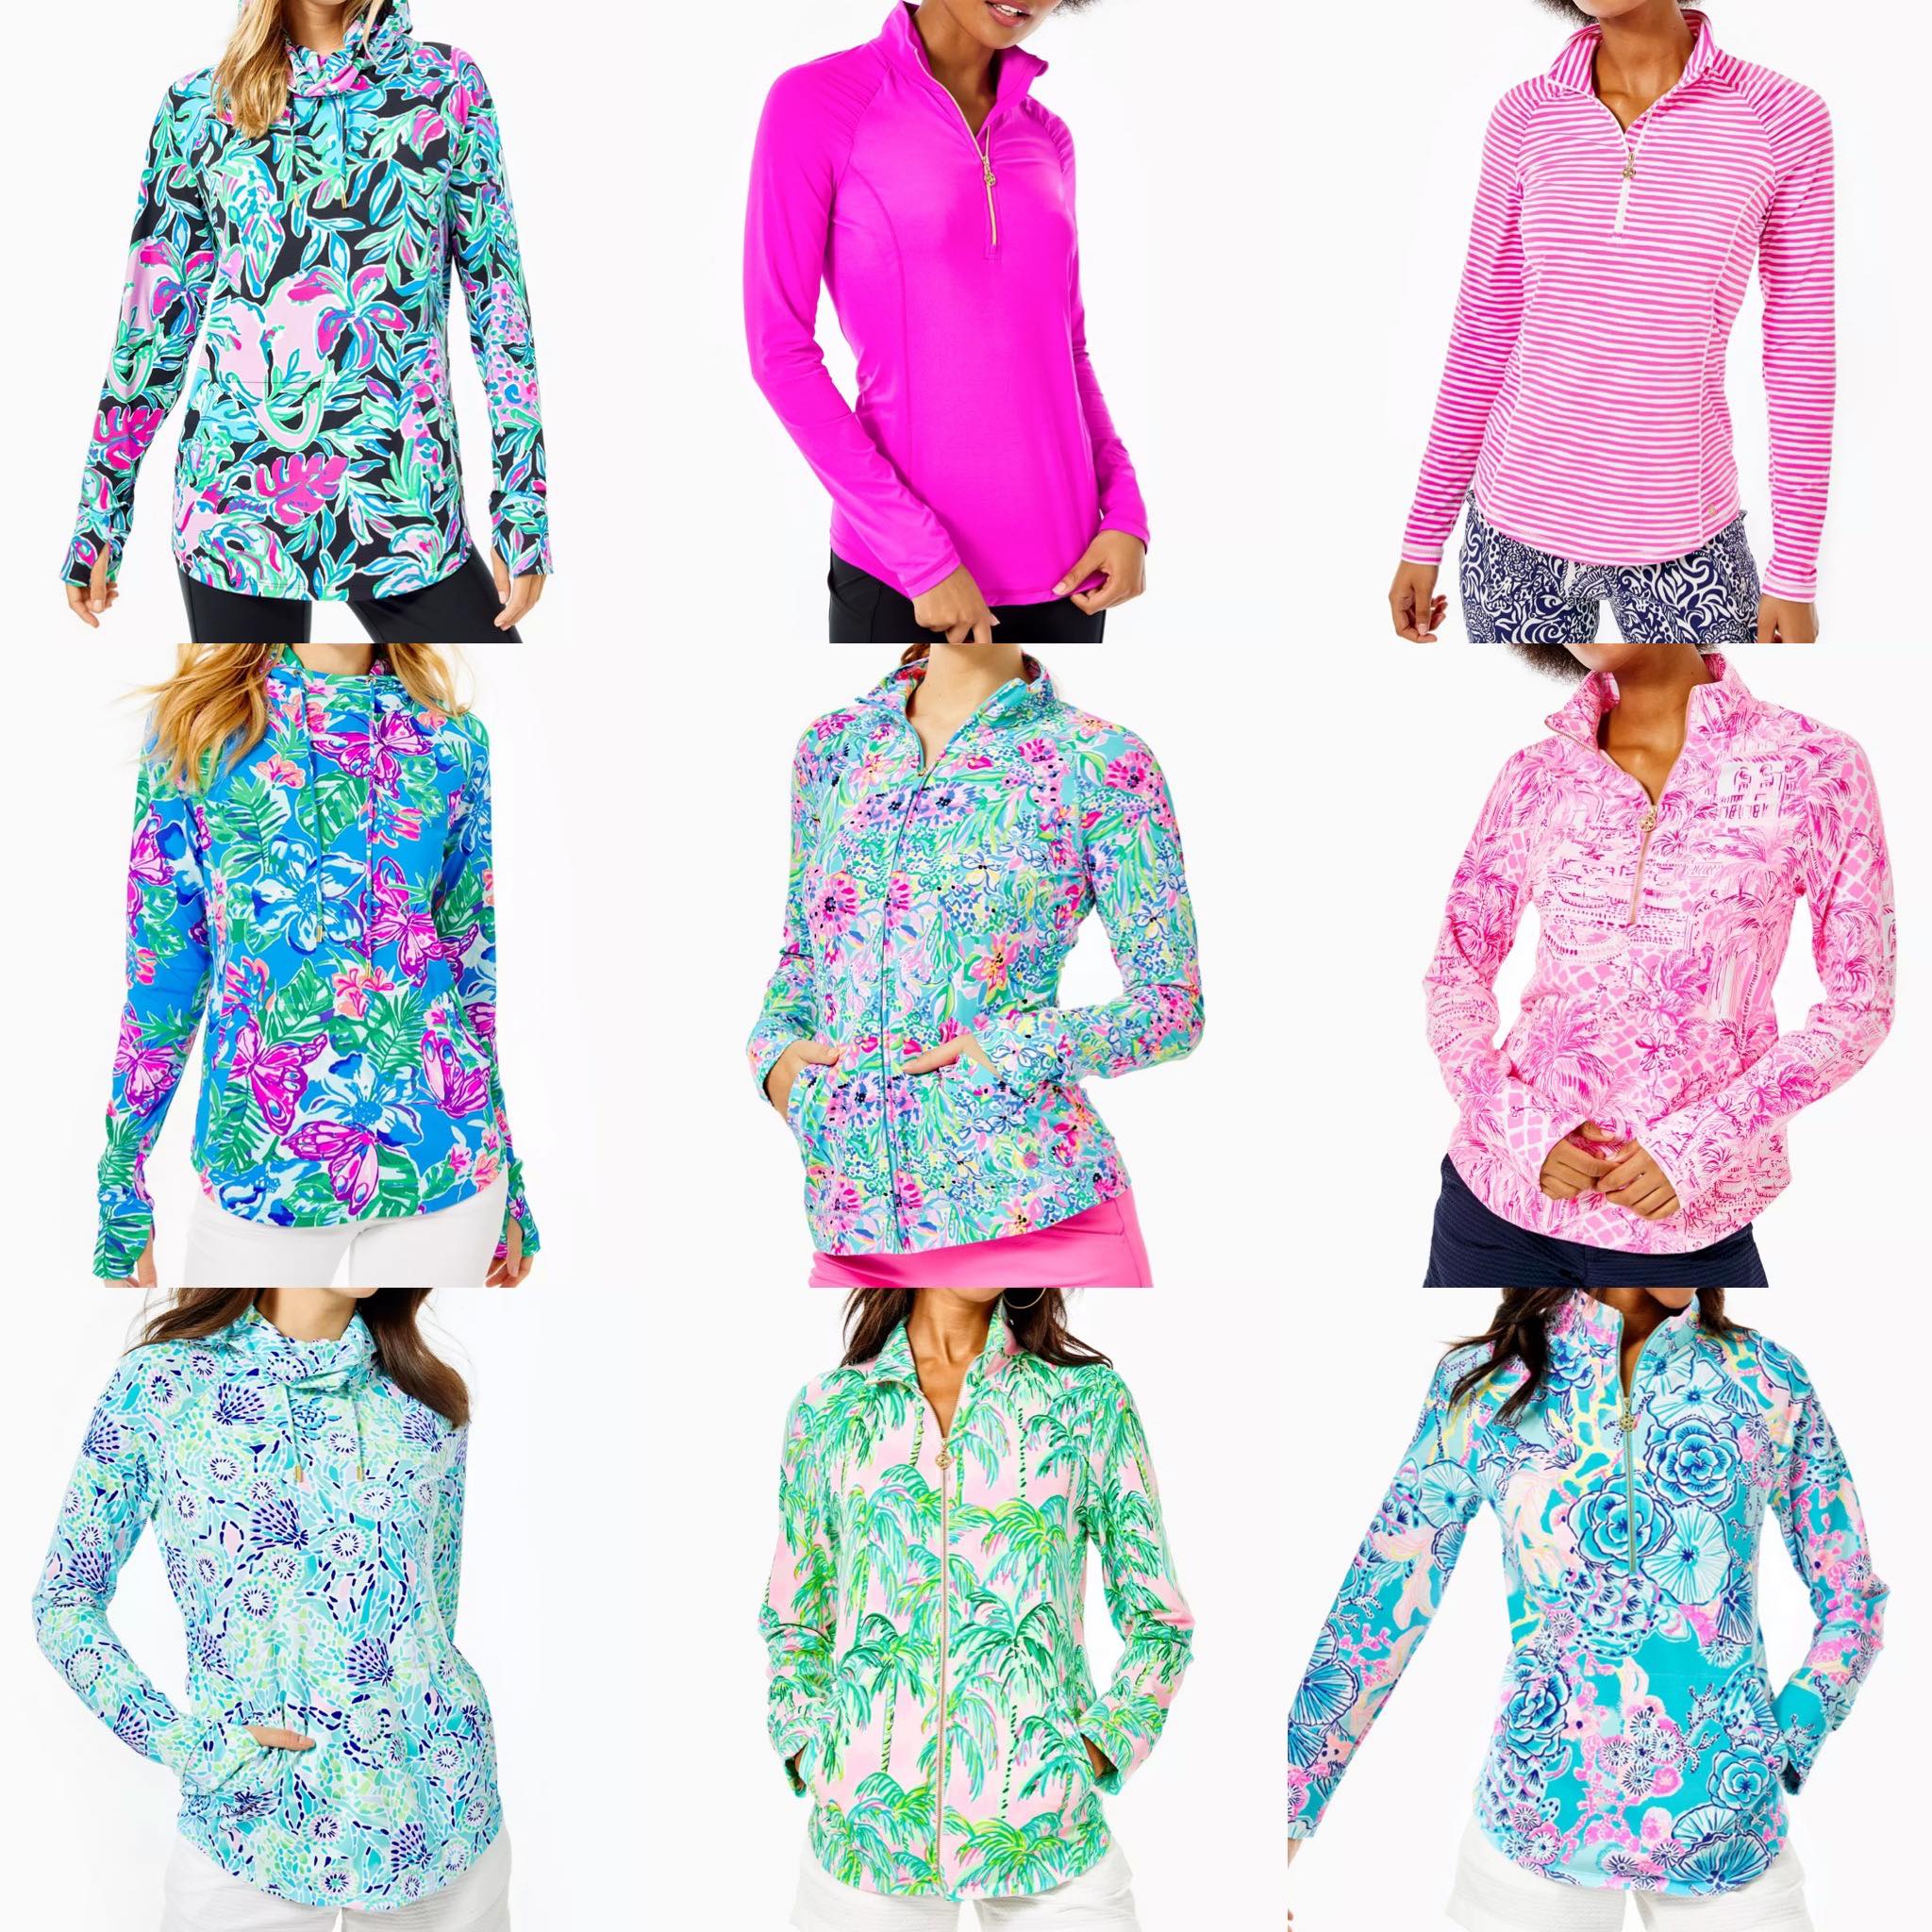 lilly pulitzer activewear jackets